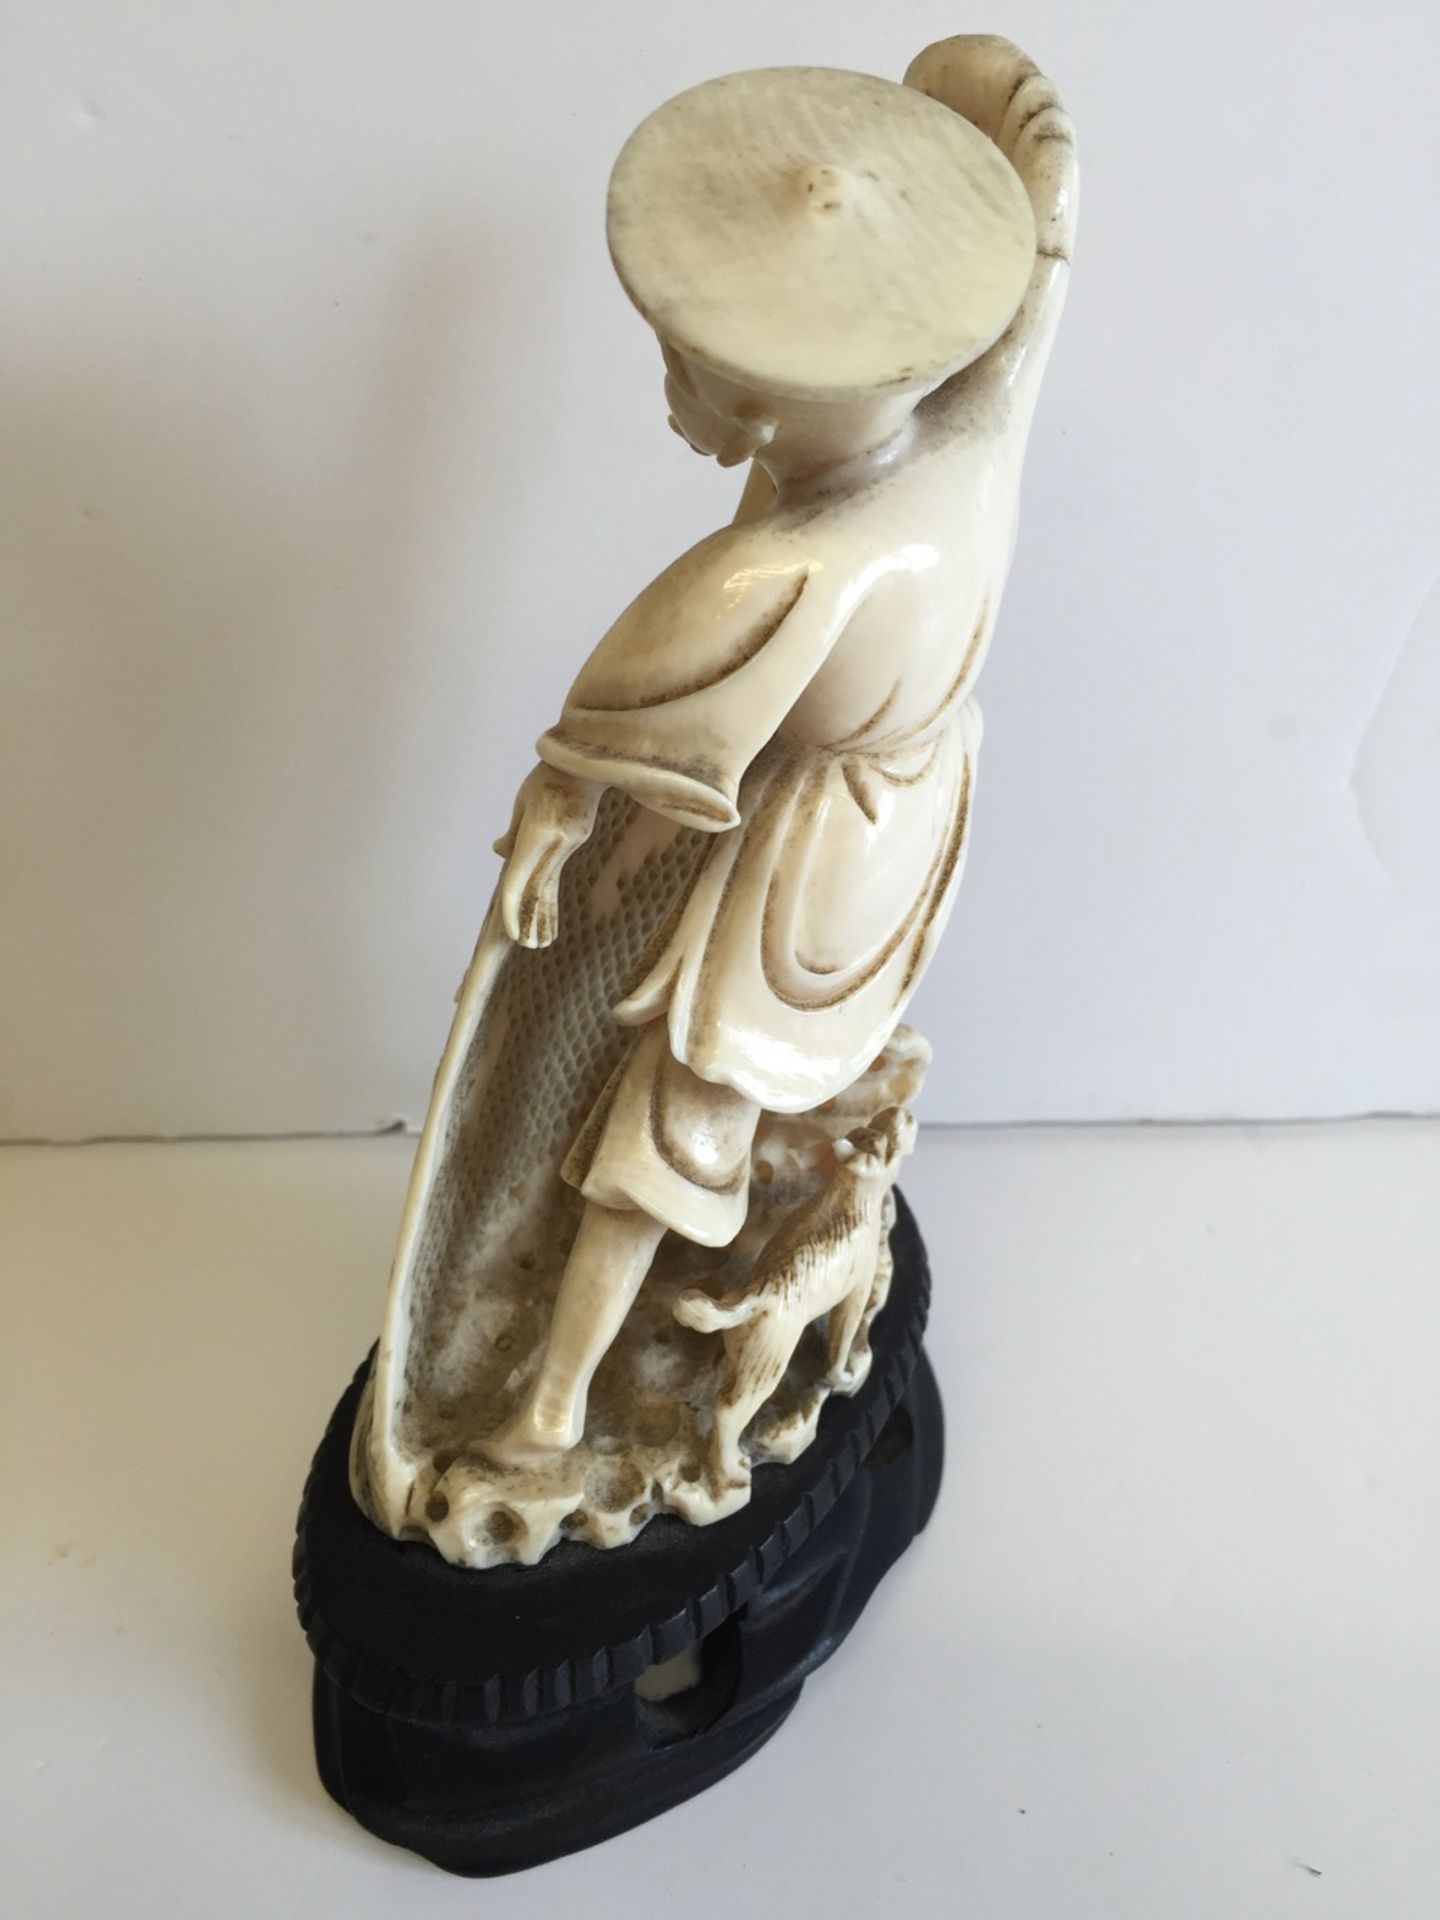 A Meiji Period Japanese Ivory Carving of a Fisherman - Image 3 of 7